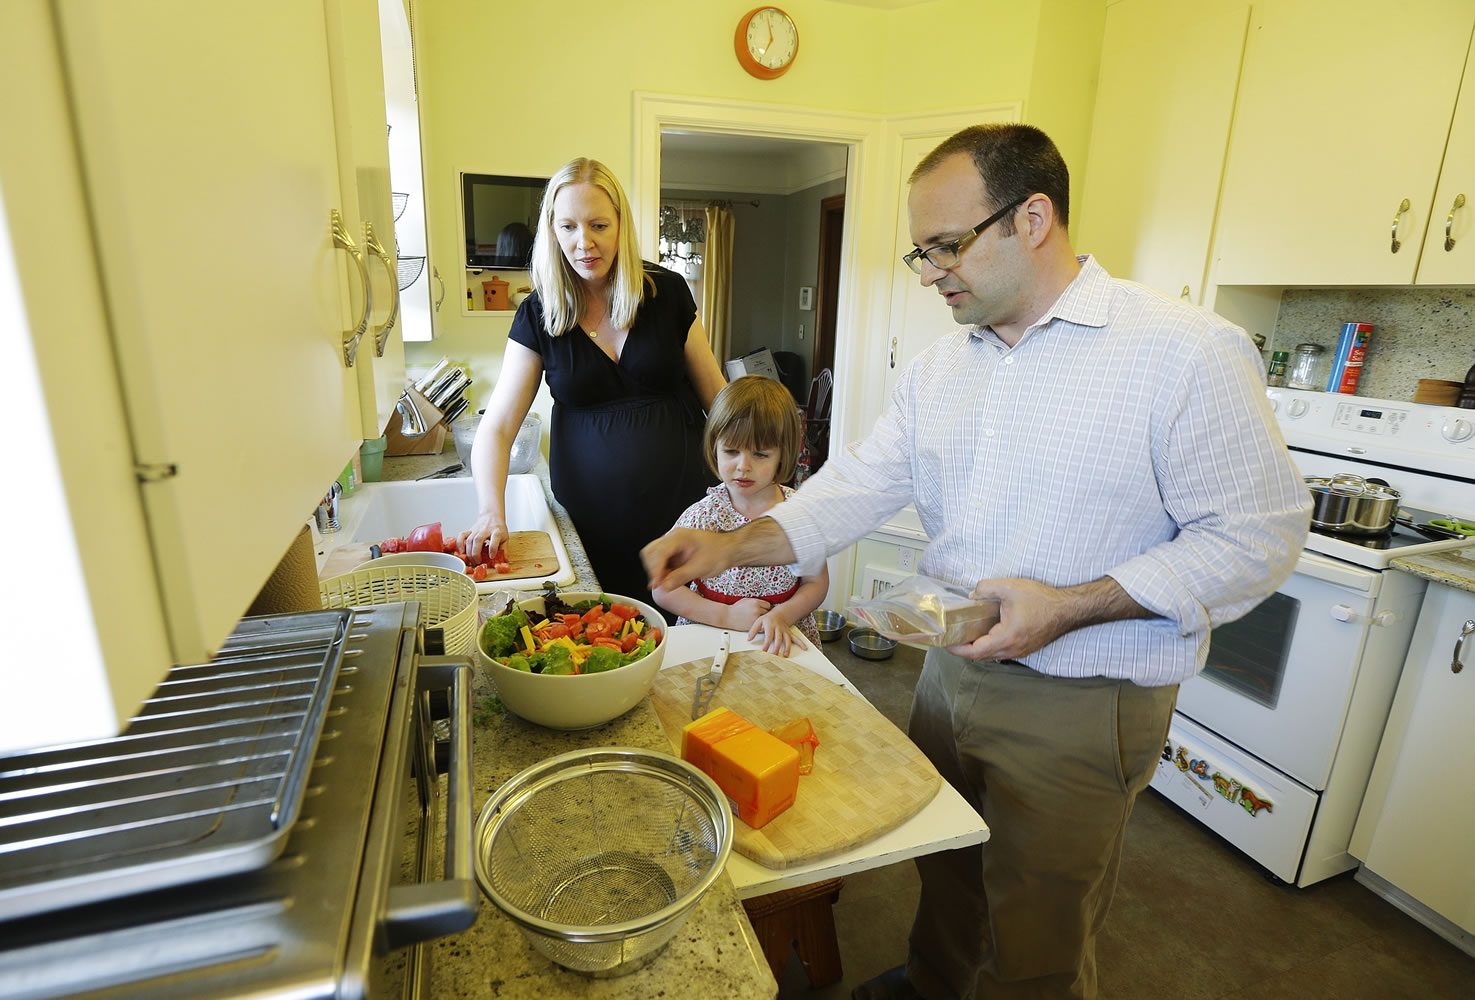 Ryan Carson, right, cooks dinner with his wife, Jenny Roraback-Carson, left, and their daughter Clara, 3, at their home in Seattle.